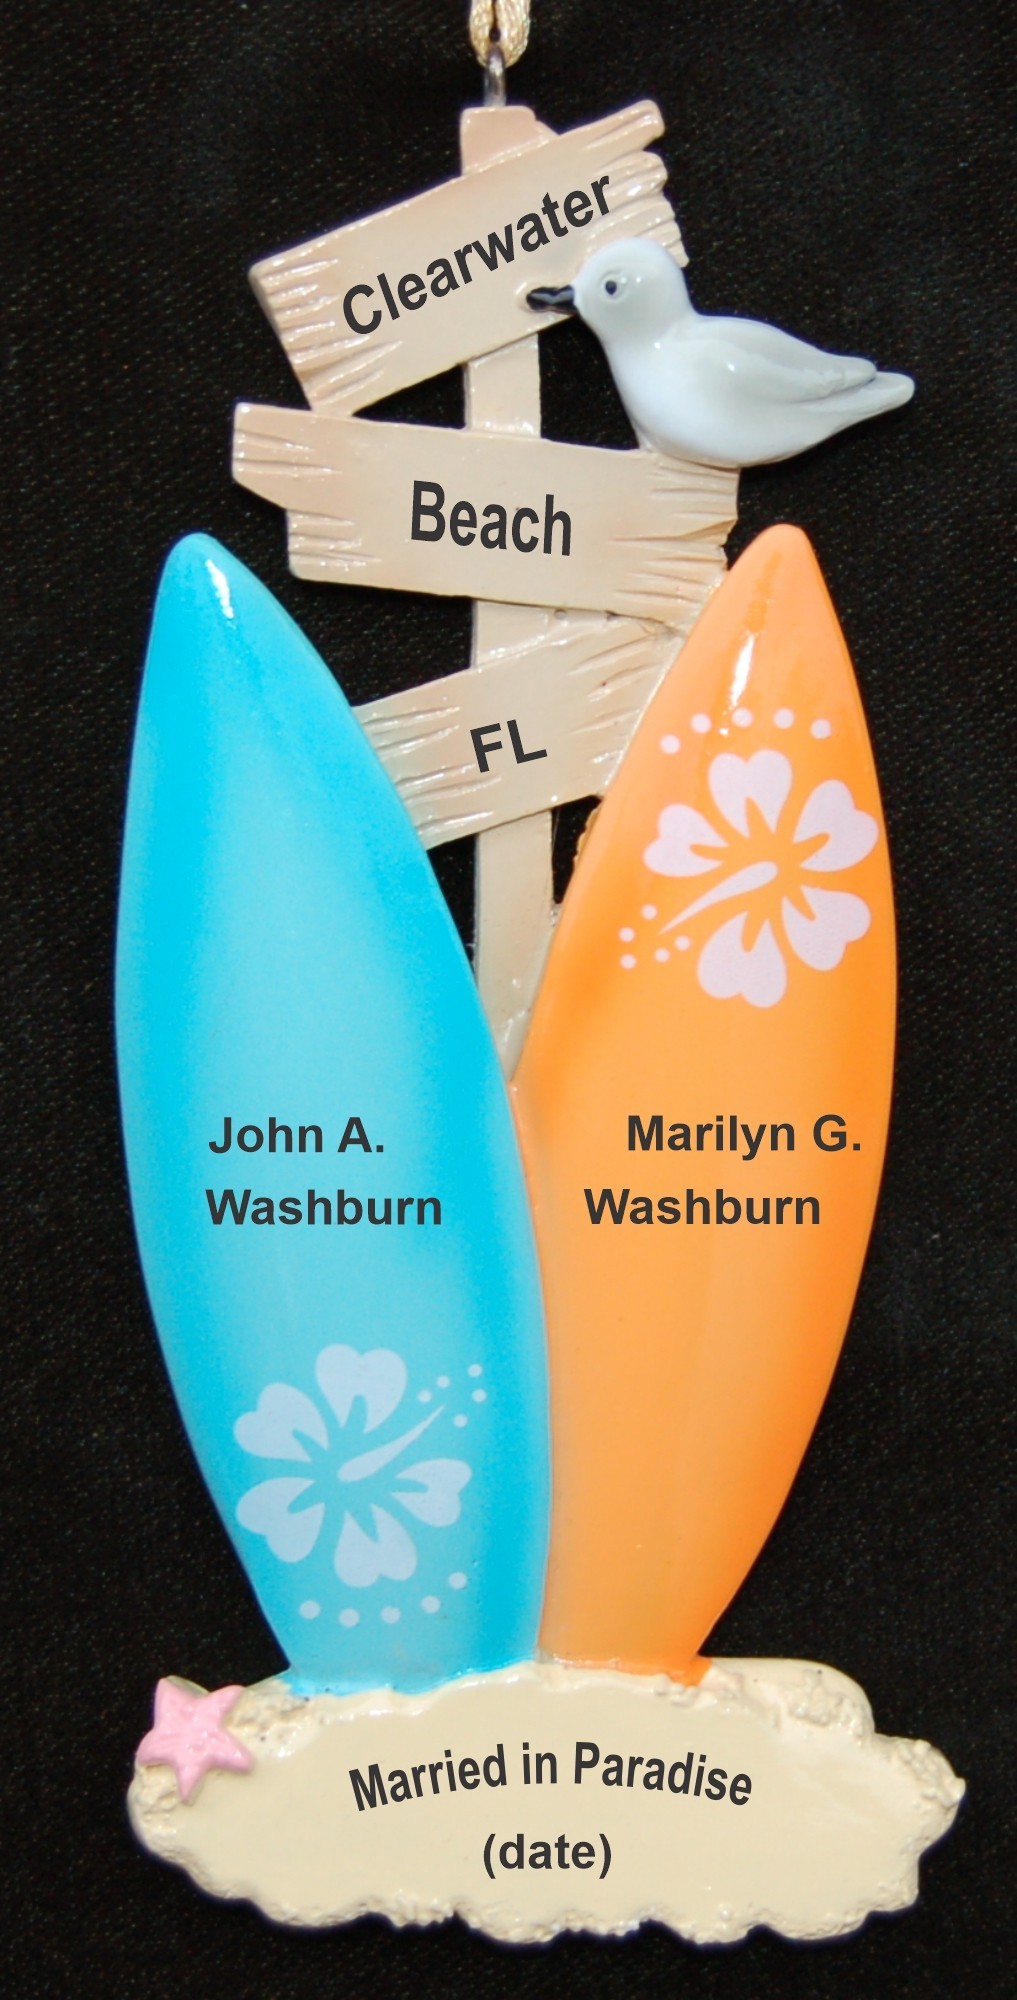 Wedding Christmas Ornament Our Beach Surfing Personalized by RussellRhodes.com